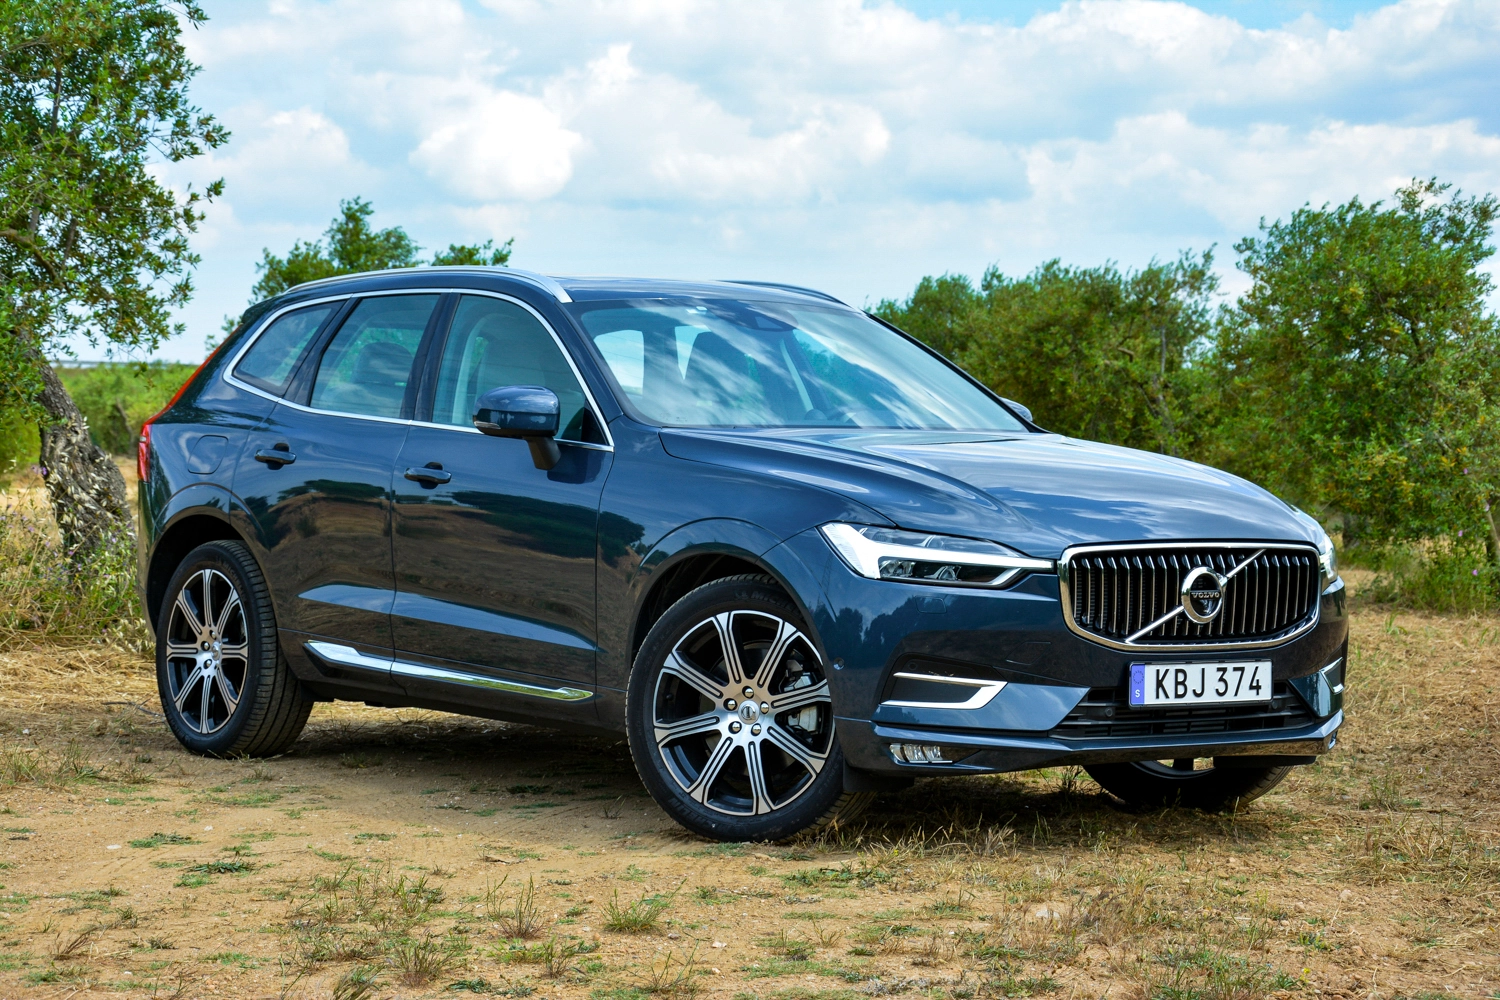 A blue Volvo XC60 parked in a field with bushes around it.